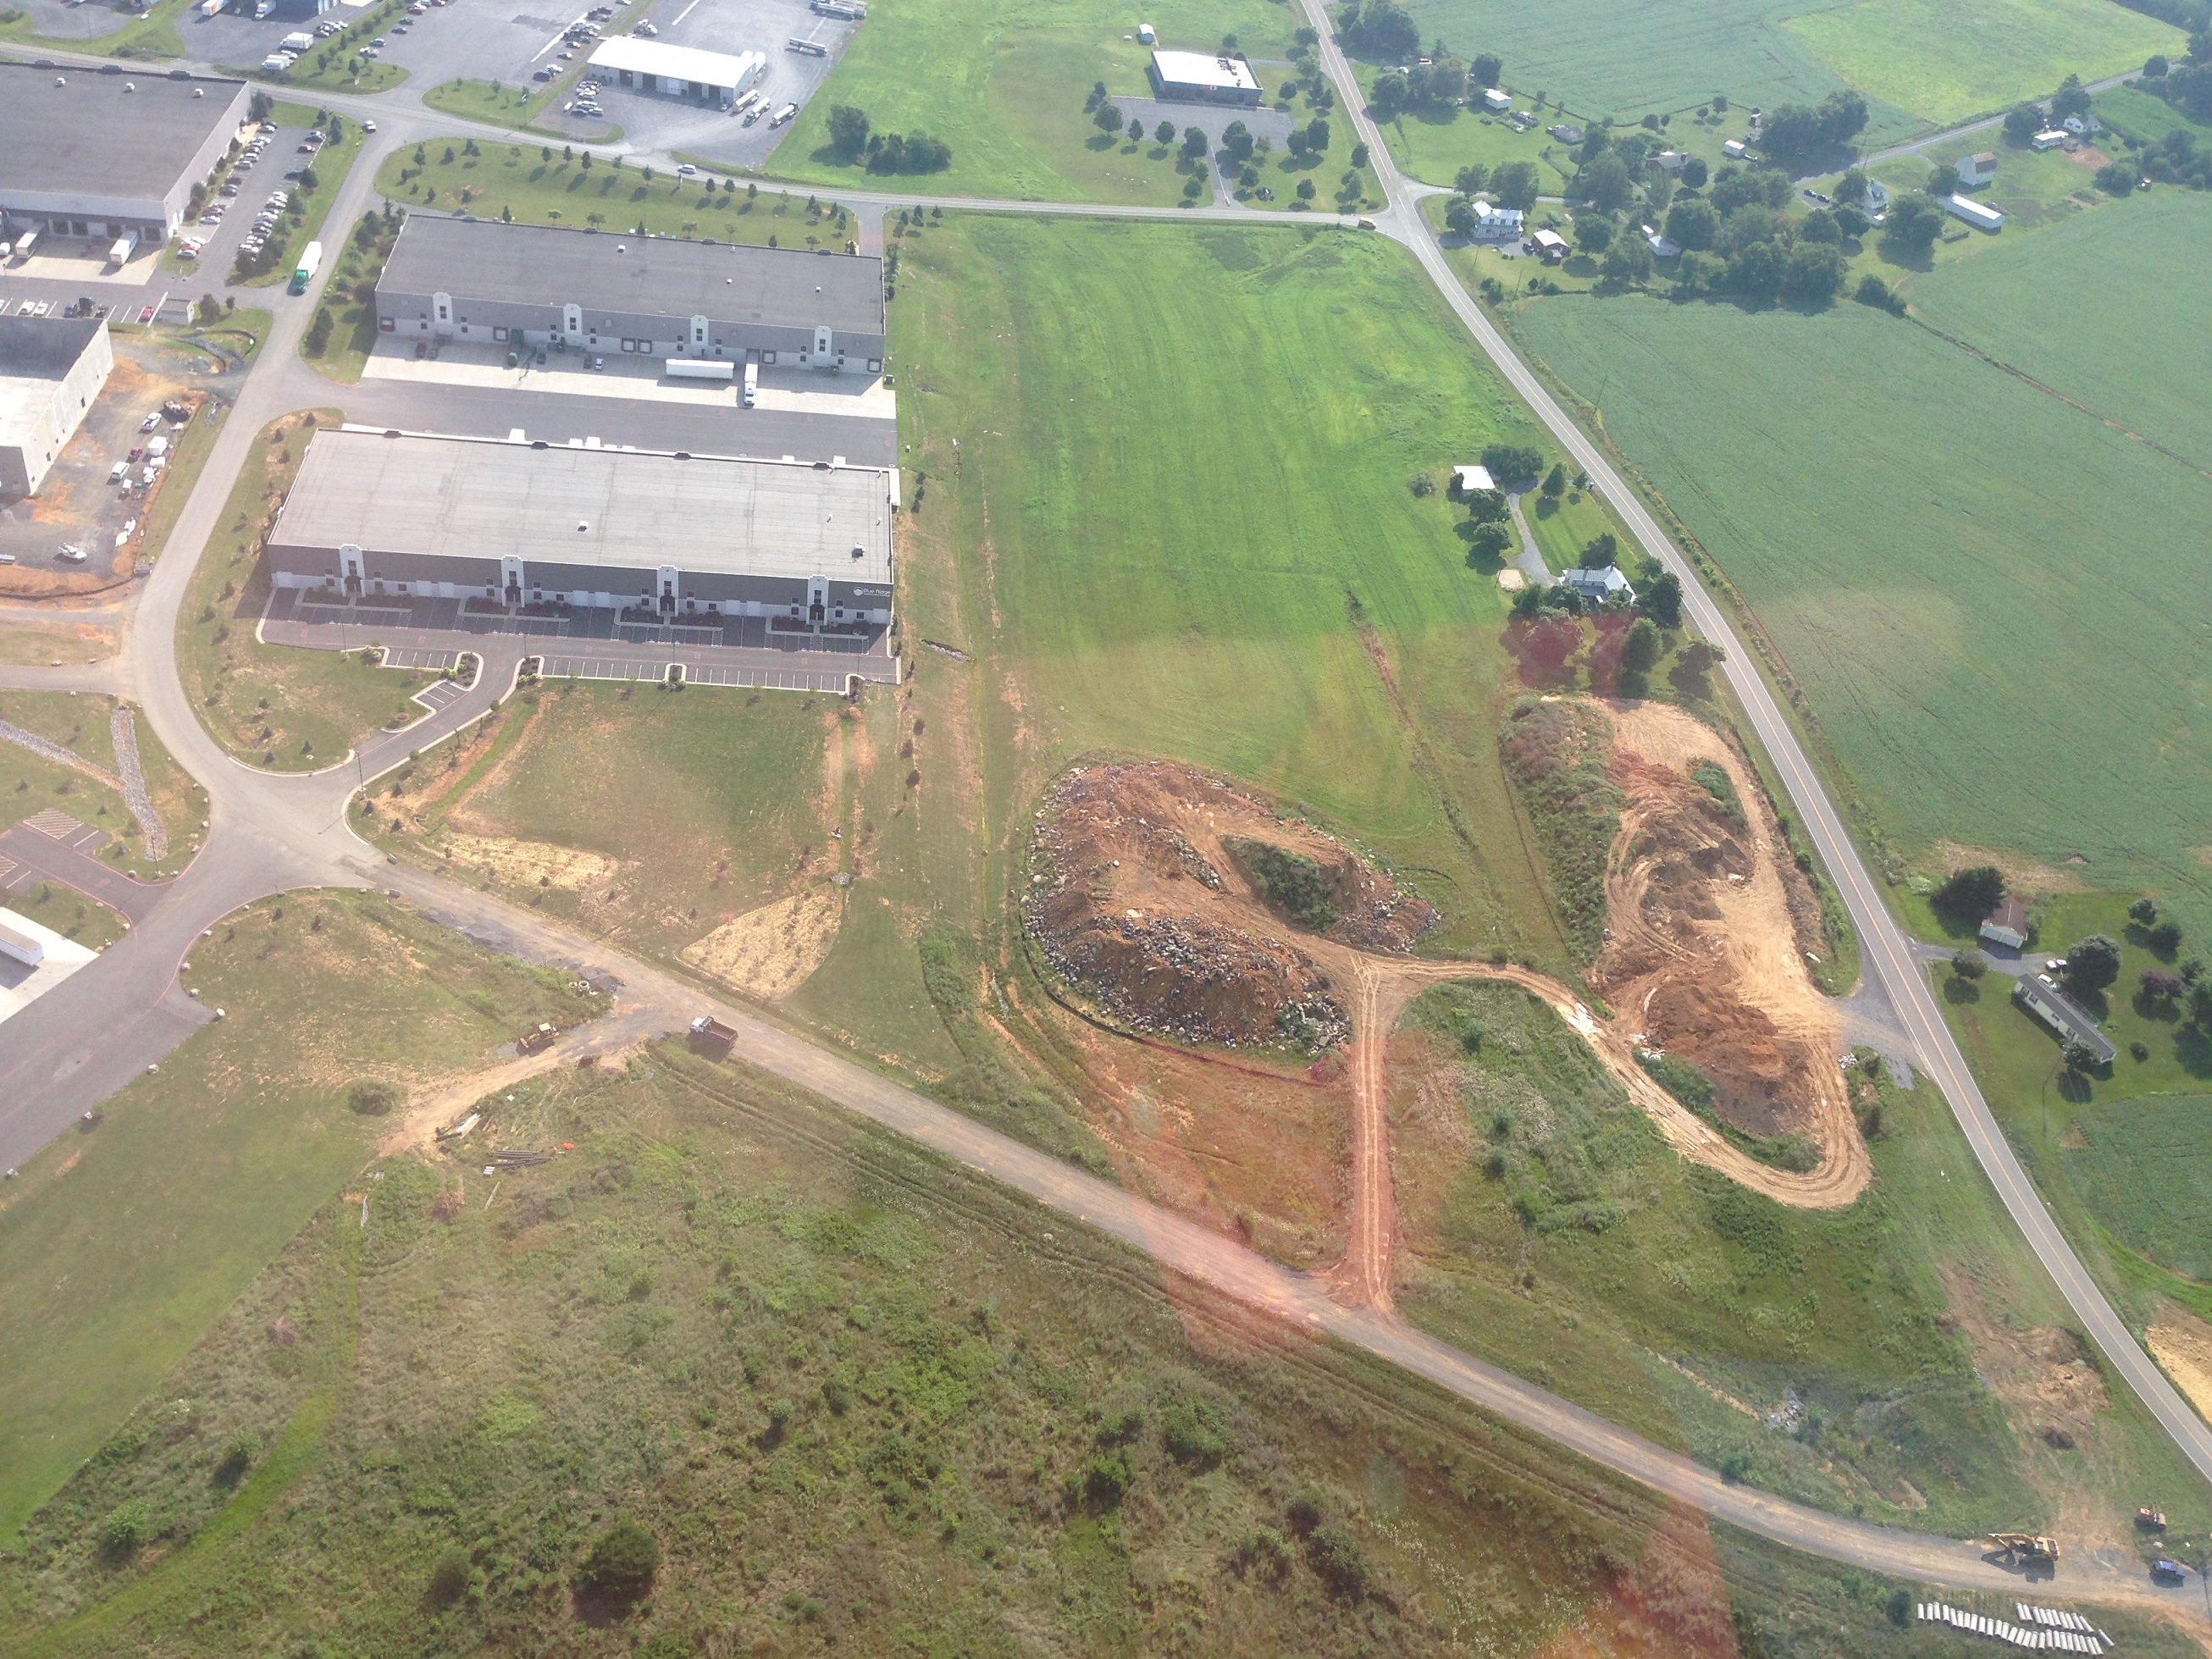 Aerial of Central Campus showing Crowe Drive and empty lots.